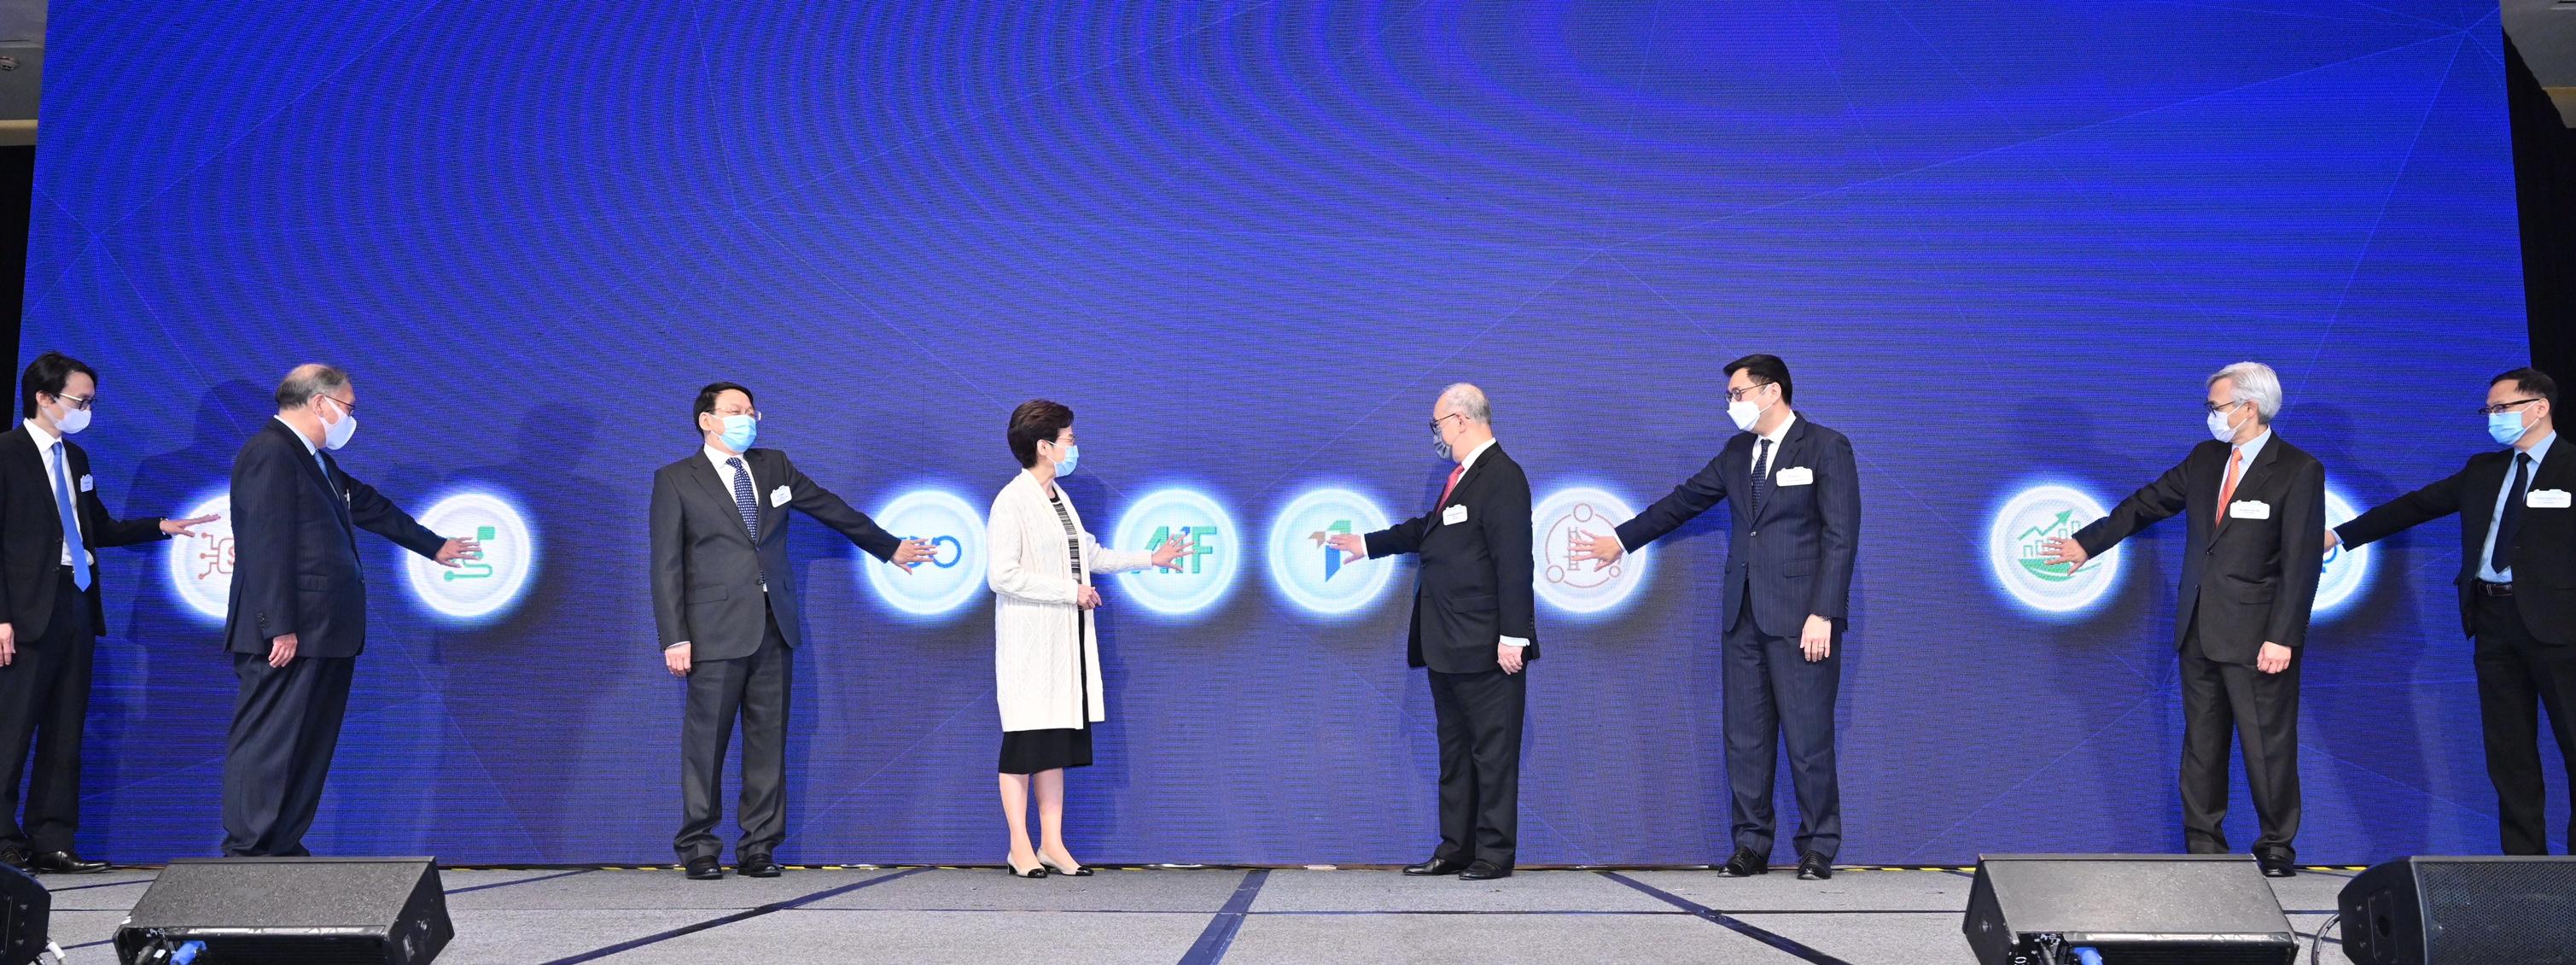 The Chief Executive, Mrs Carrie Lam, attended the Asian Insurance Forum 2021 Opening Ceremony this morning (December 7). Photo shows (from third left) Deputy Director of the Liaison Office of the Central People's Government in the Hong Kong Special Administrative Region Mr Yin Zonghua; Mrs Lam; the Chairman of the Insurance Authority, Dr Moses Cheng; the Chairman of the Financial Services Development Council, Mr Laurence Li, SC; Non-Executive Director of the Insurance Authority Mr Stephen Yiu; the Chief Executive Officer of the Insurance Authority, Mr Clement Cheung; and other guests officiating at the Opening Ceremony.